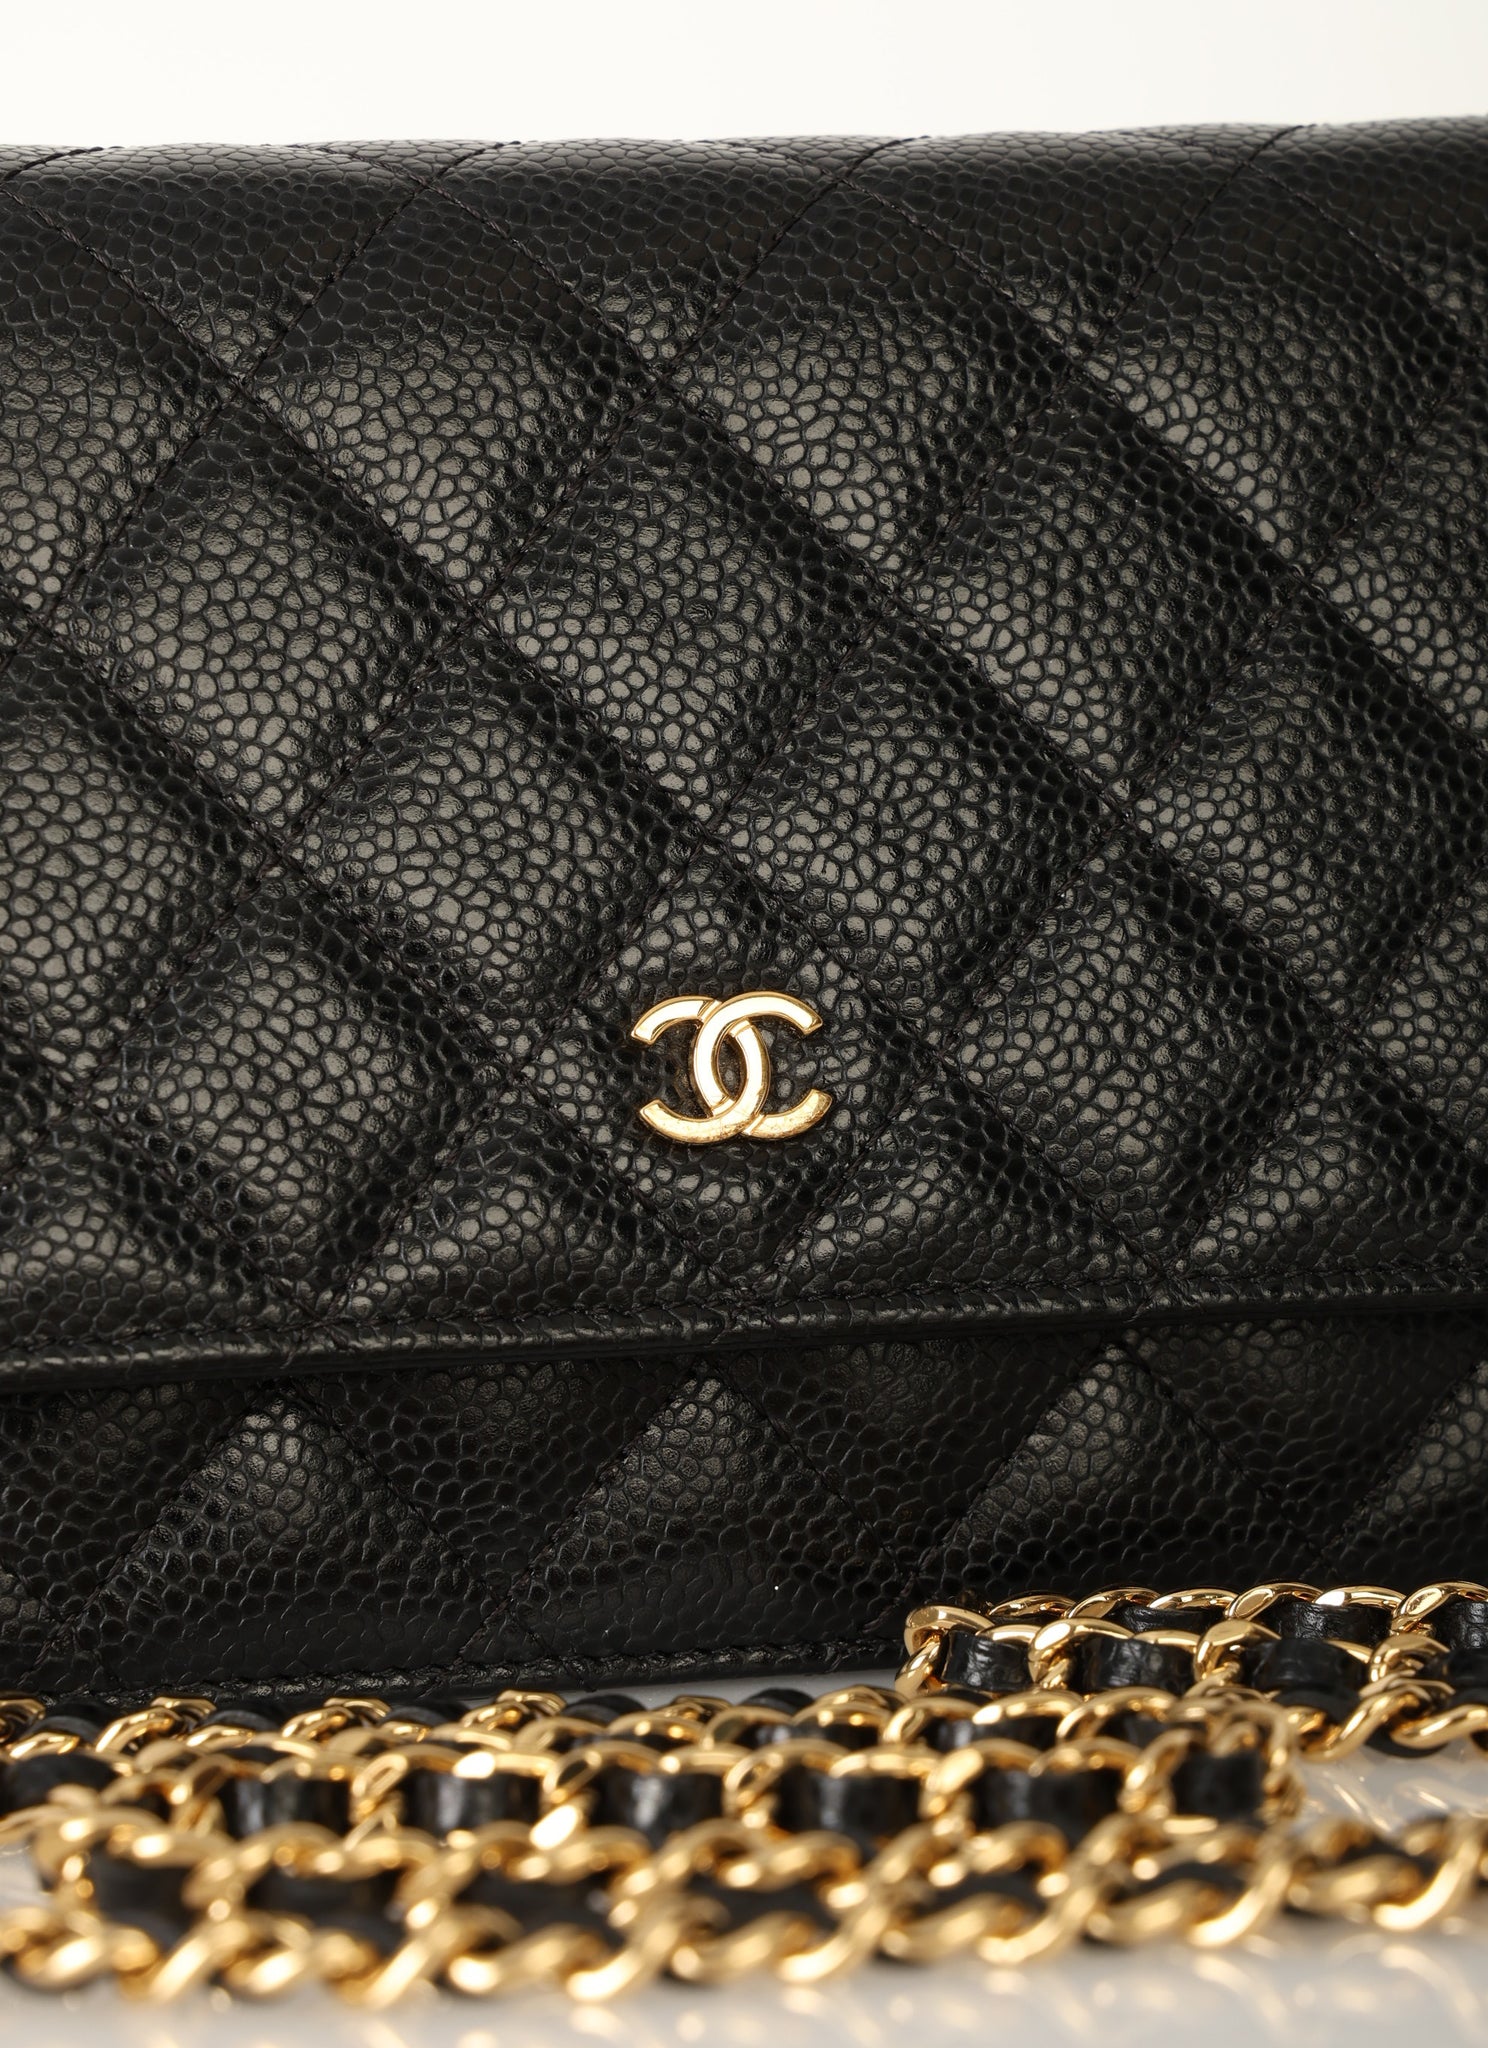 Chanel 2019 Caviar Wallet on Chain